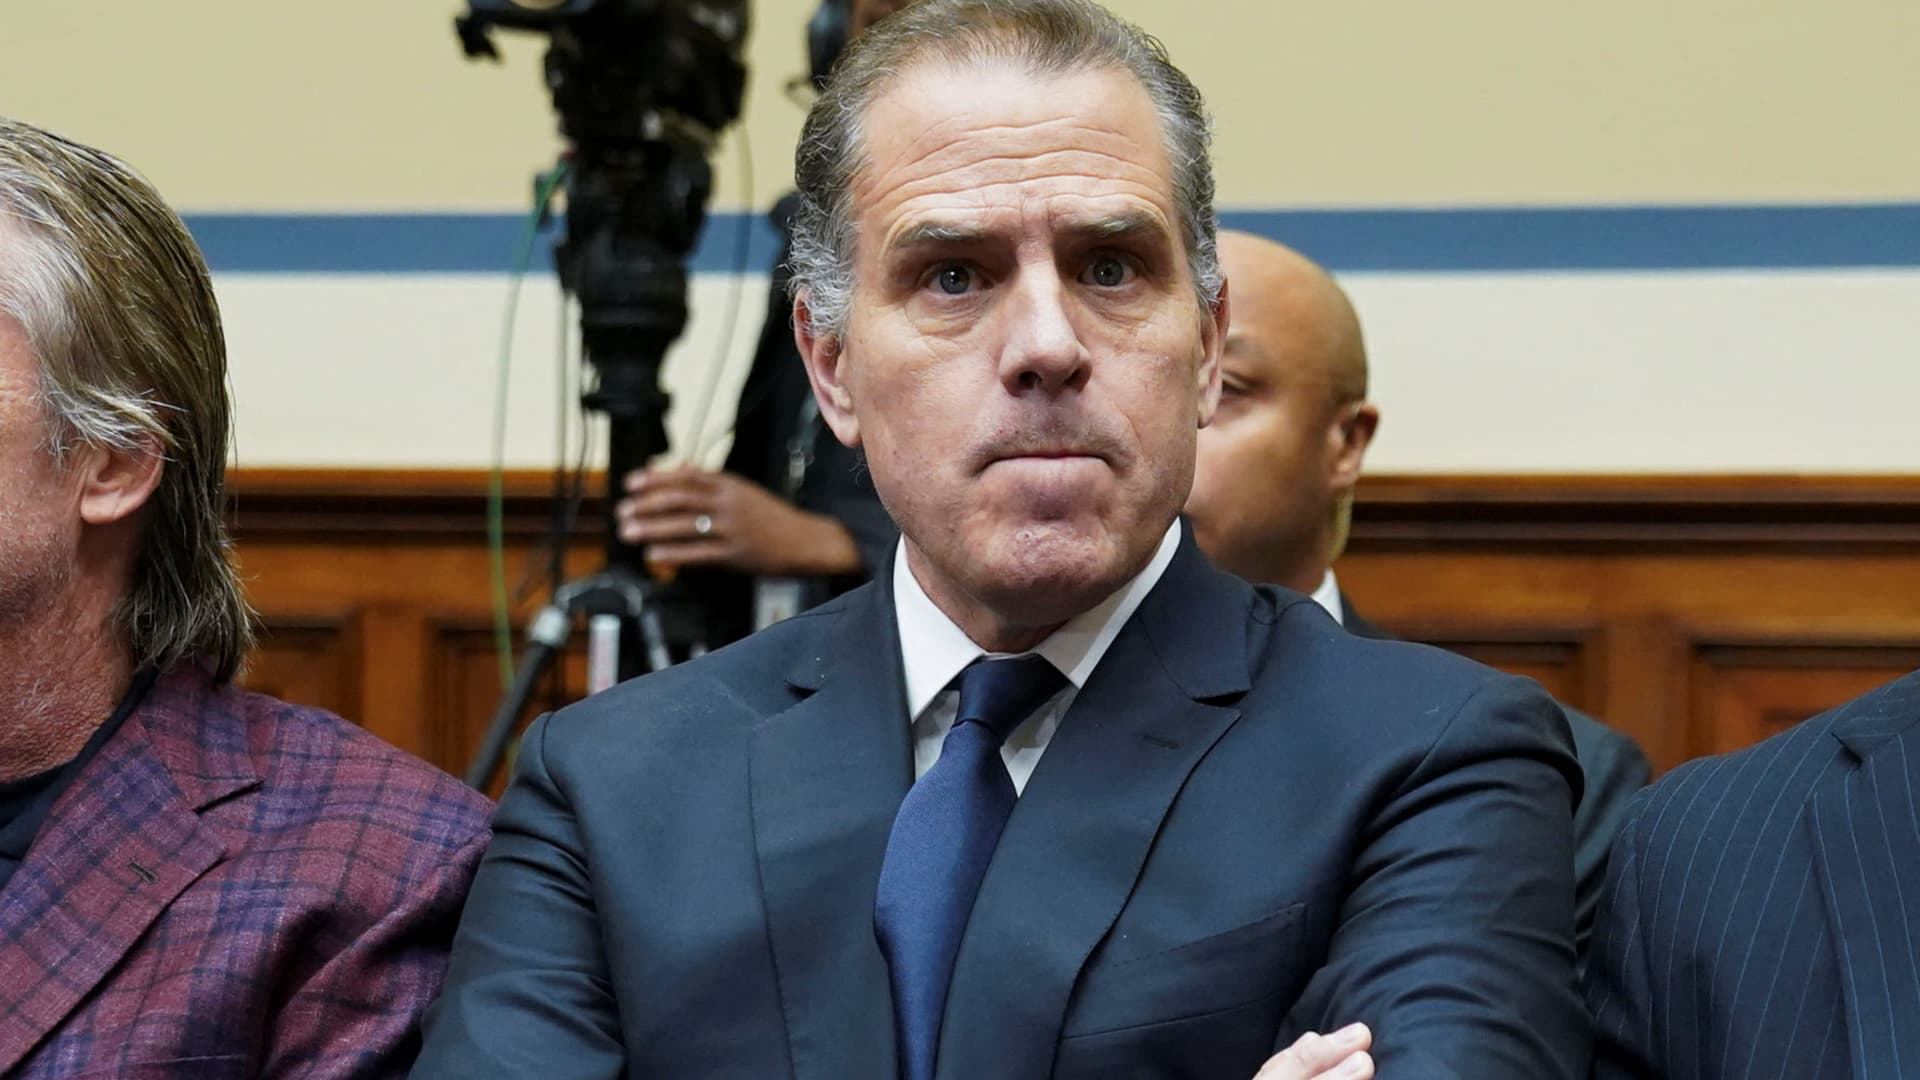 Hunter Biden profusely agrees to the deposition as House heads toward a contempt resolution